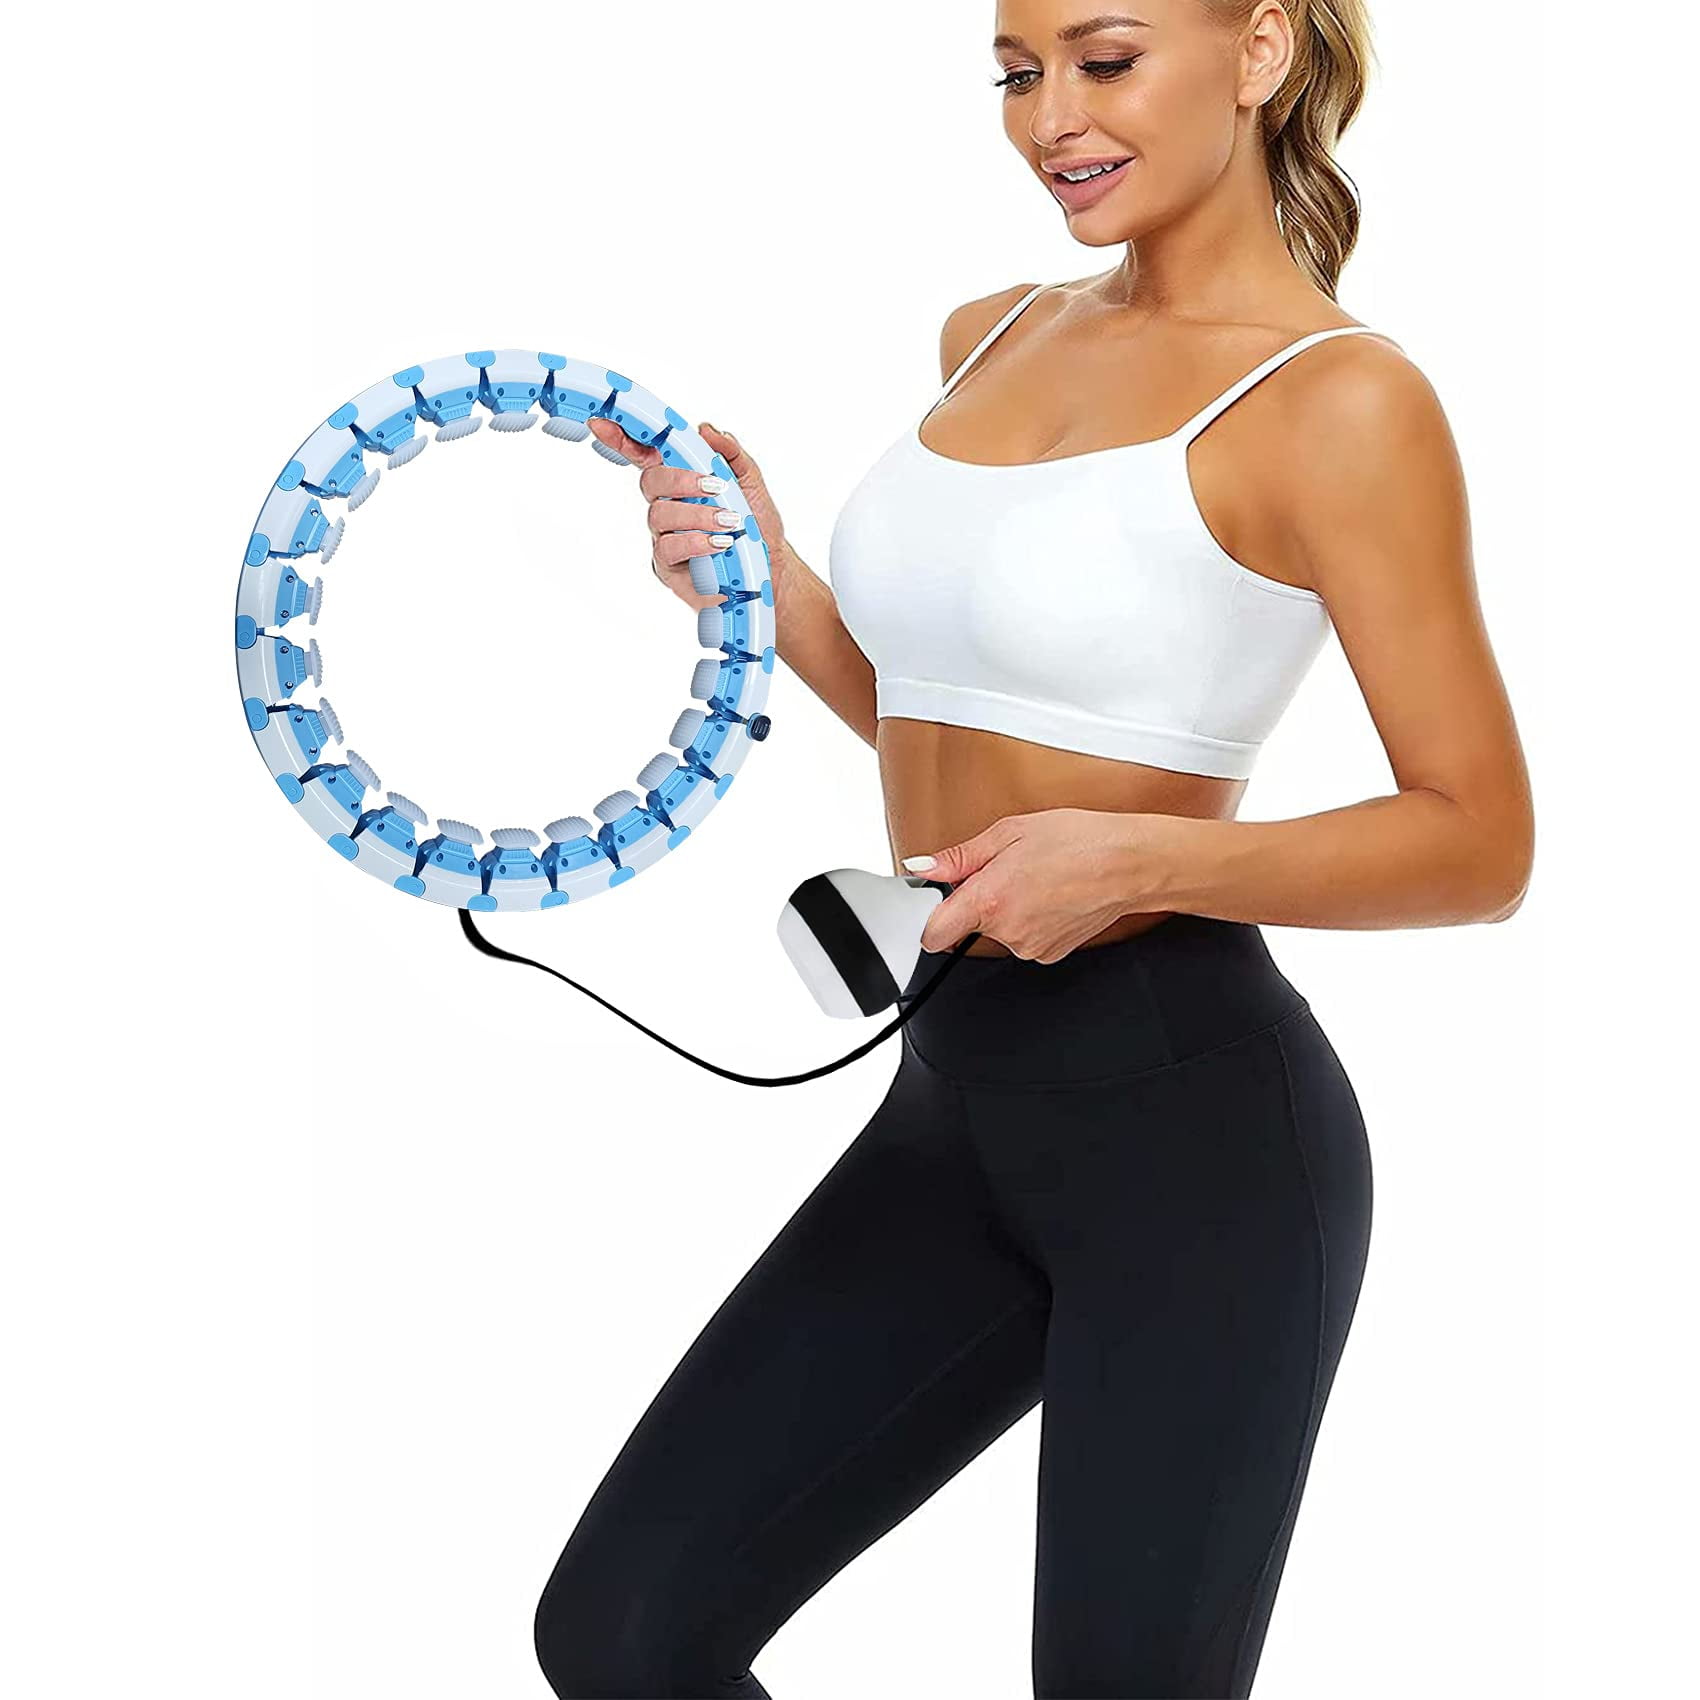 360 Degree Abdomen Fitness Massage Workout Weight Loss Hula Hoop for Women Non-Fall Exercise Hoop with 24 Detachable Knots Adjustable Auto-Spinning Ball Hula Hoops for Adults 